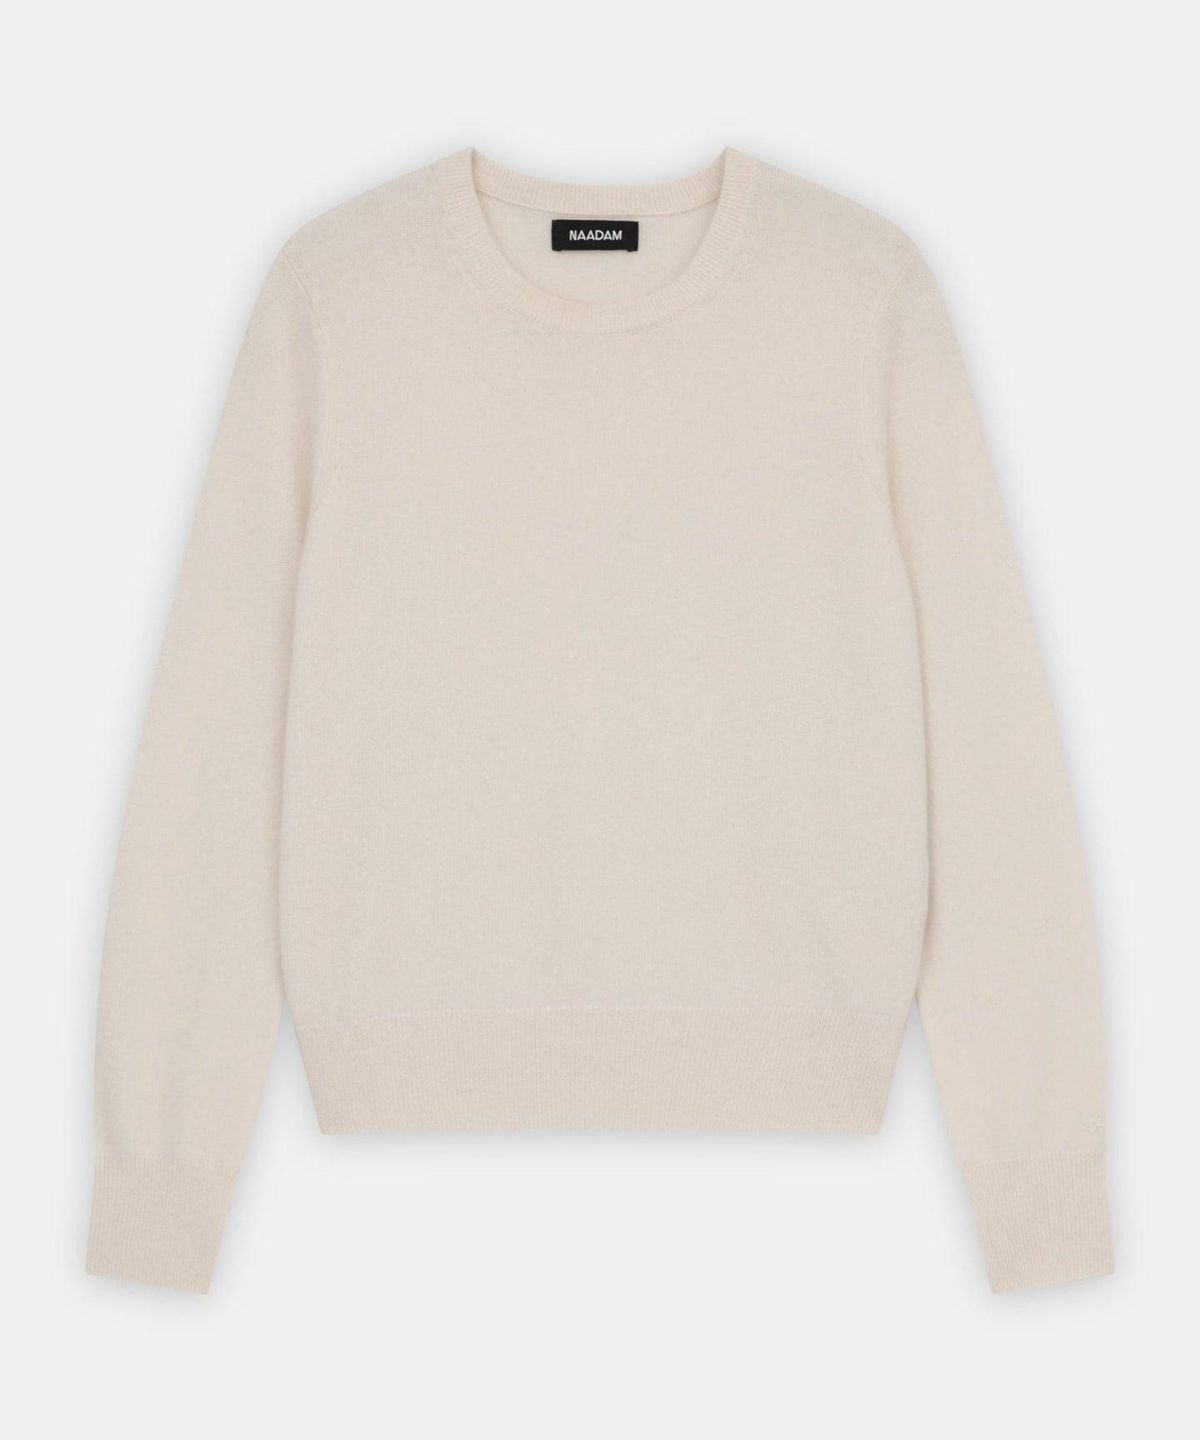 The Essential $75 Sweater